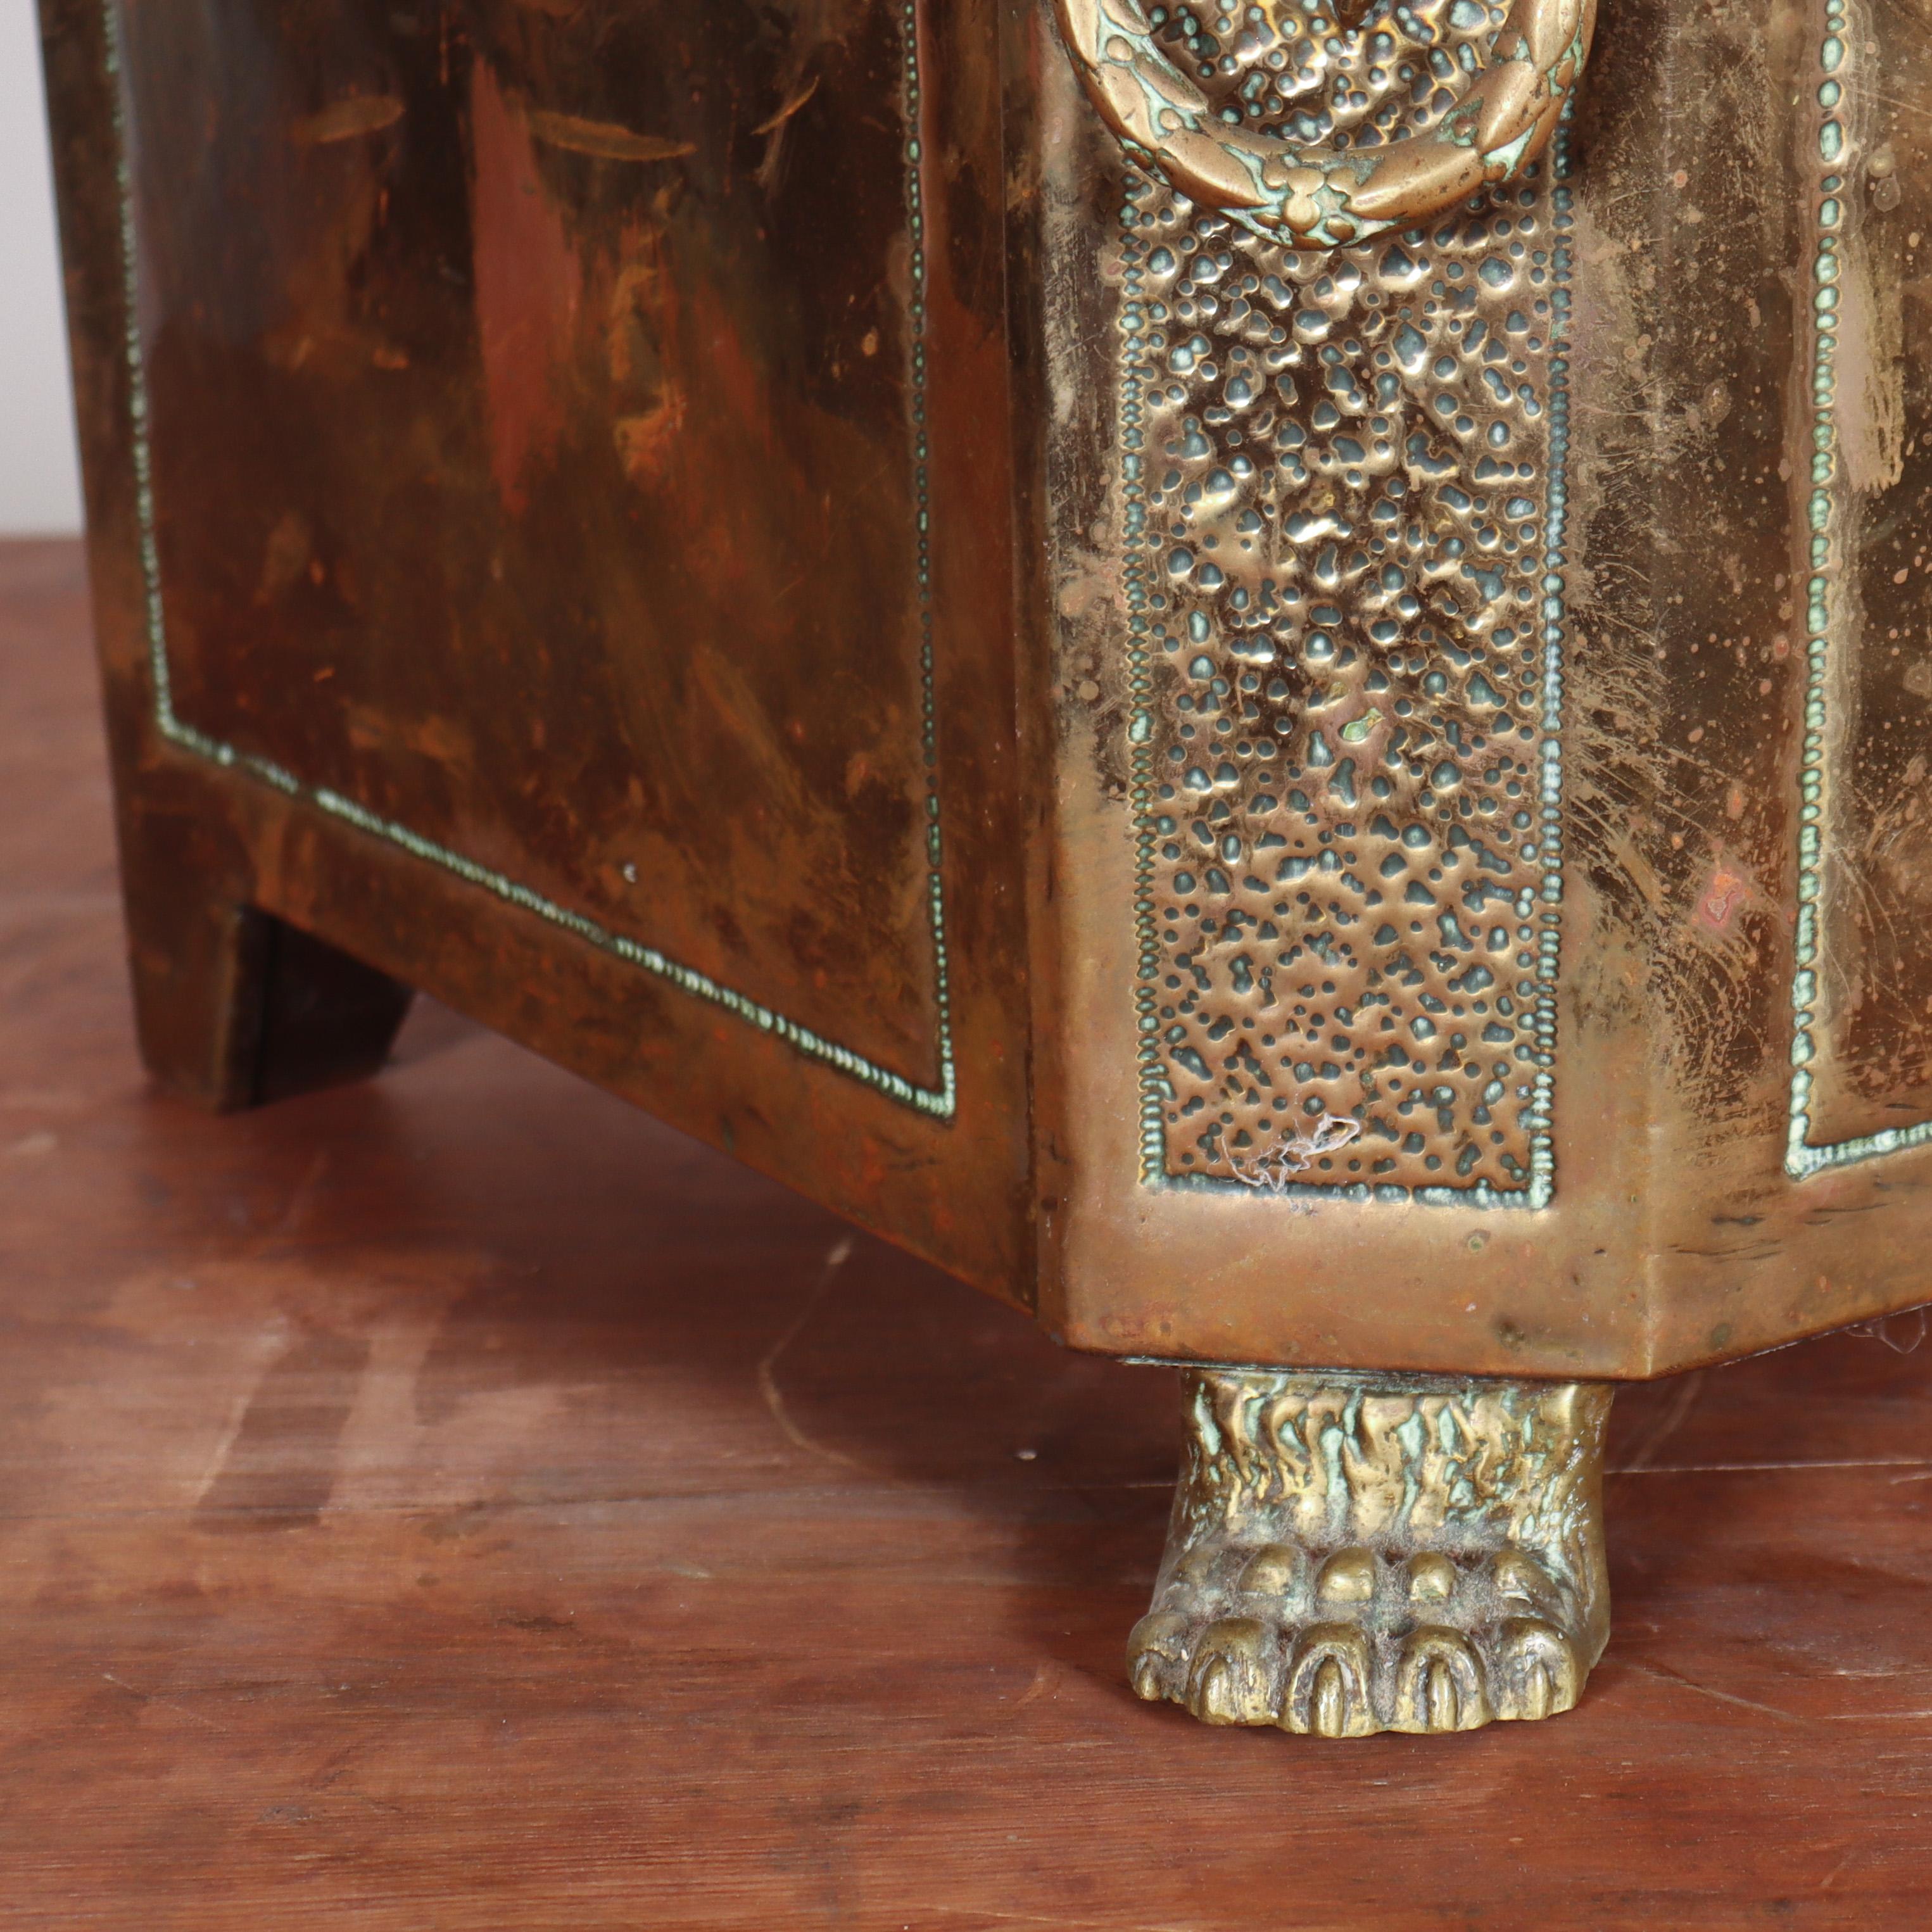 Late 19th C brass coal bin, decorated with lions heads and paw feet. 1890.

Reference: 7990

Dimensions
20 inches (51 cms) Wide
14.5 inches (37 cms) Deep
14 inches (36 cms) High